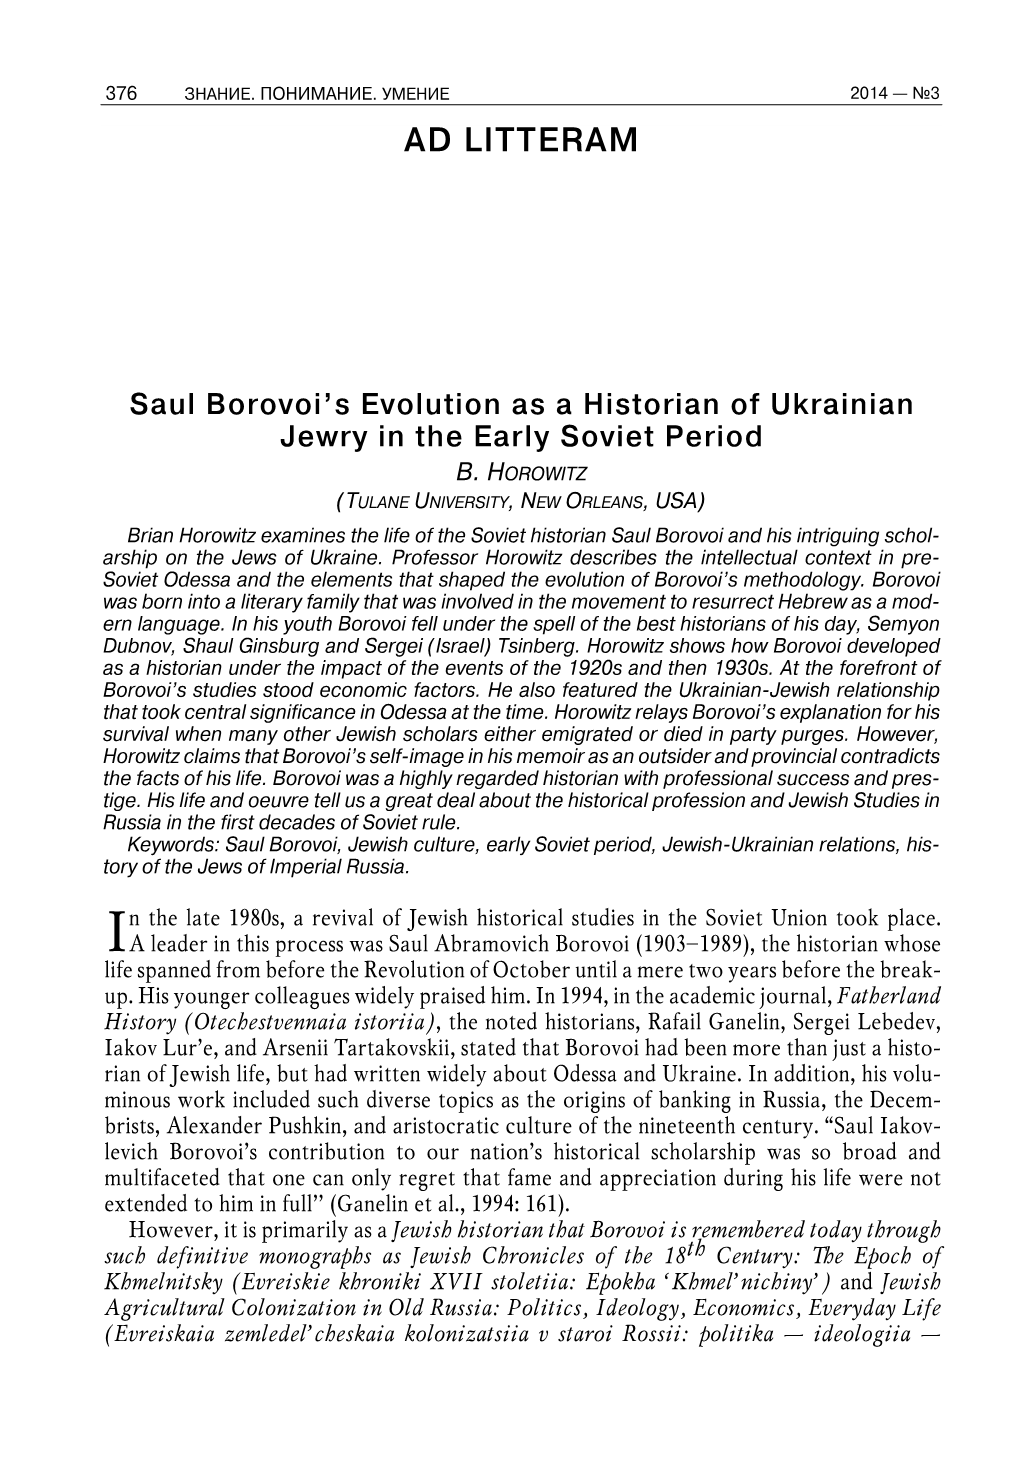 Saul Borovoi's Evolution As a Historian of Ukrainian Jewry in the Early Soviet Period